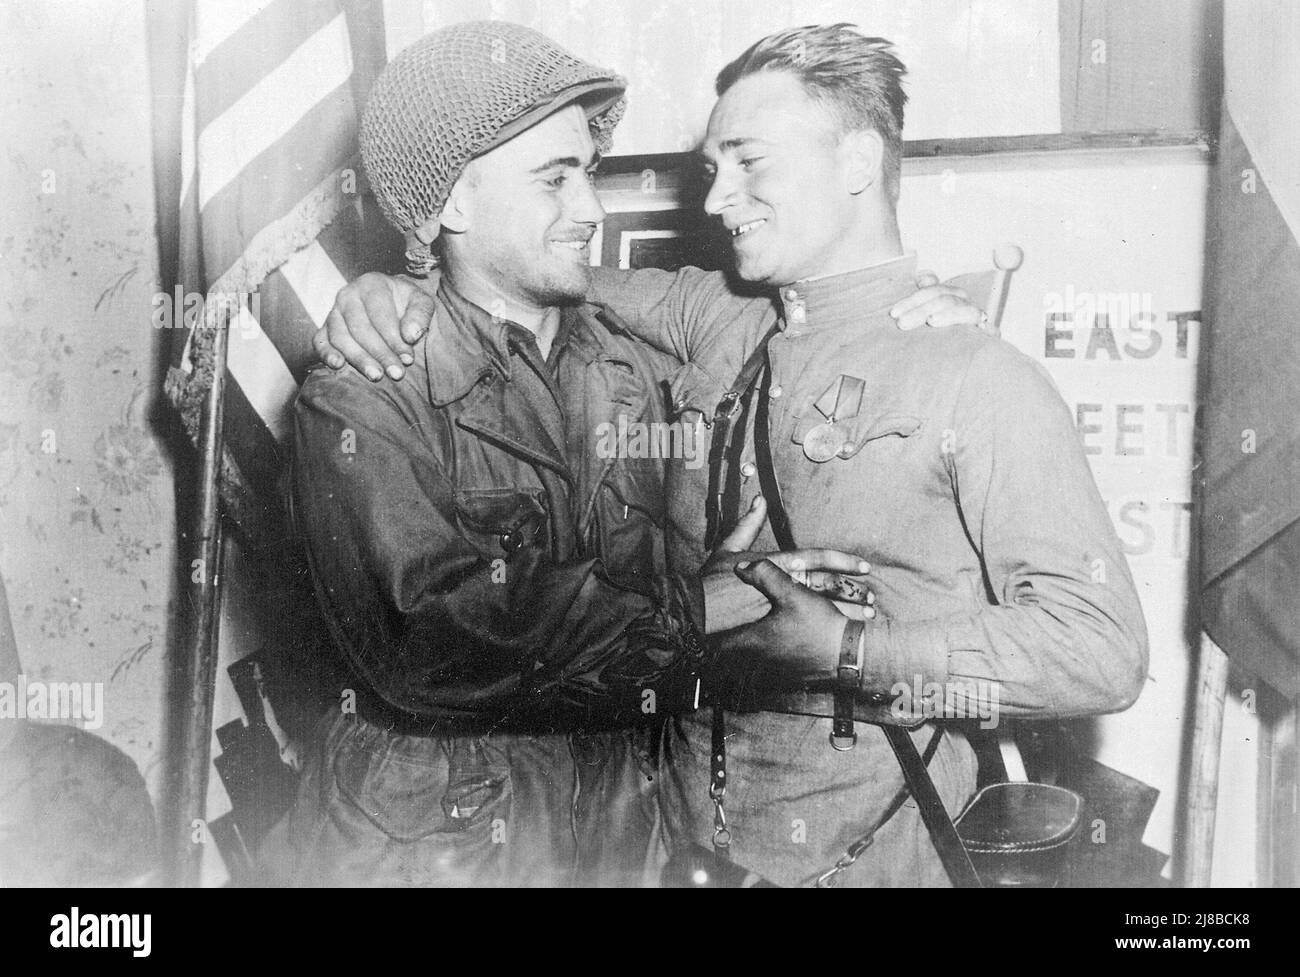 An American soldier (2nd Lt. William Robertson, US Army) and a Red Army soldier (Lt. Alexander Sylvashko, Red Army) meeting during the allied invasion of Germany. The photo is a staged propaganda piece, with the nations flags and the East Meets West sign behind. Stock Photo